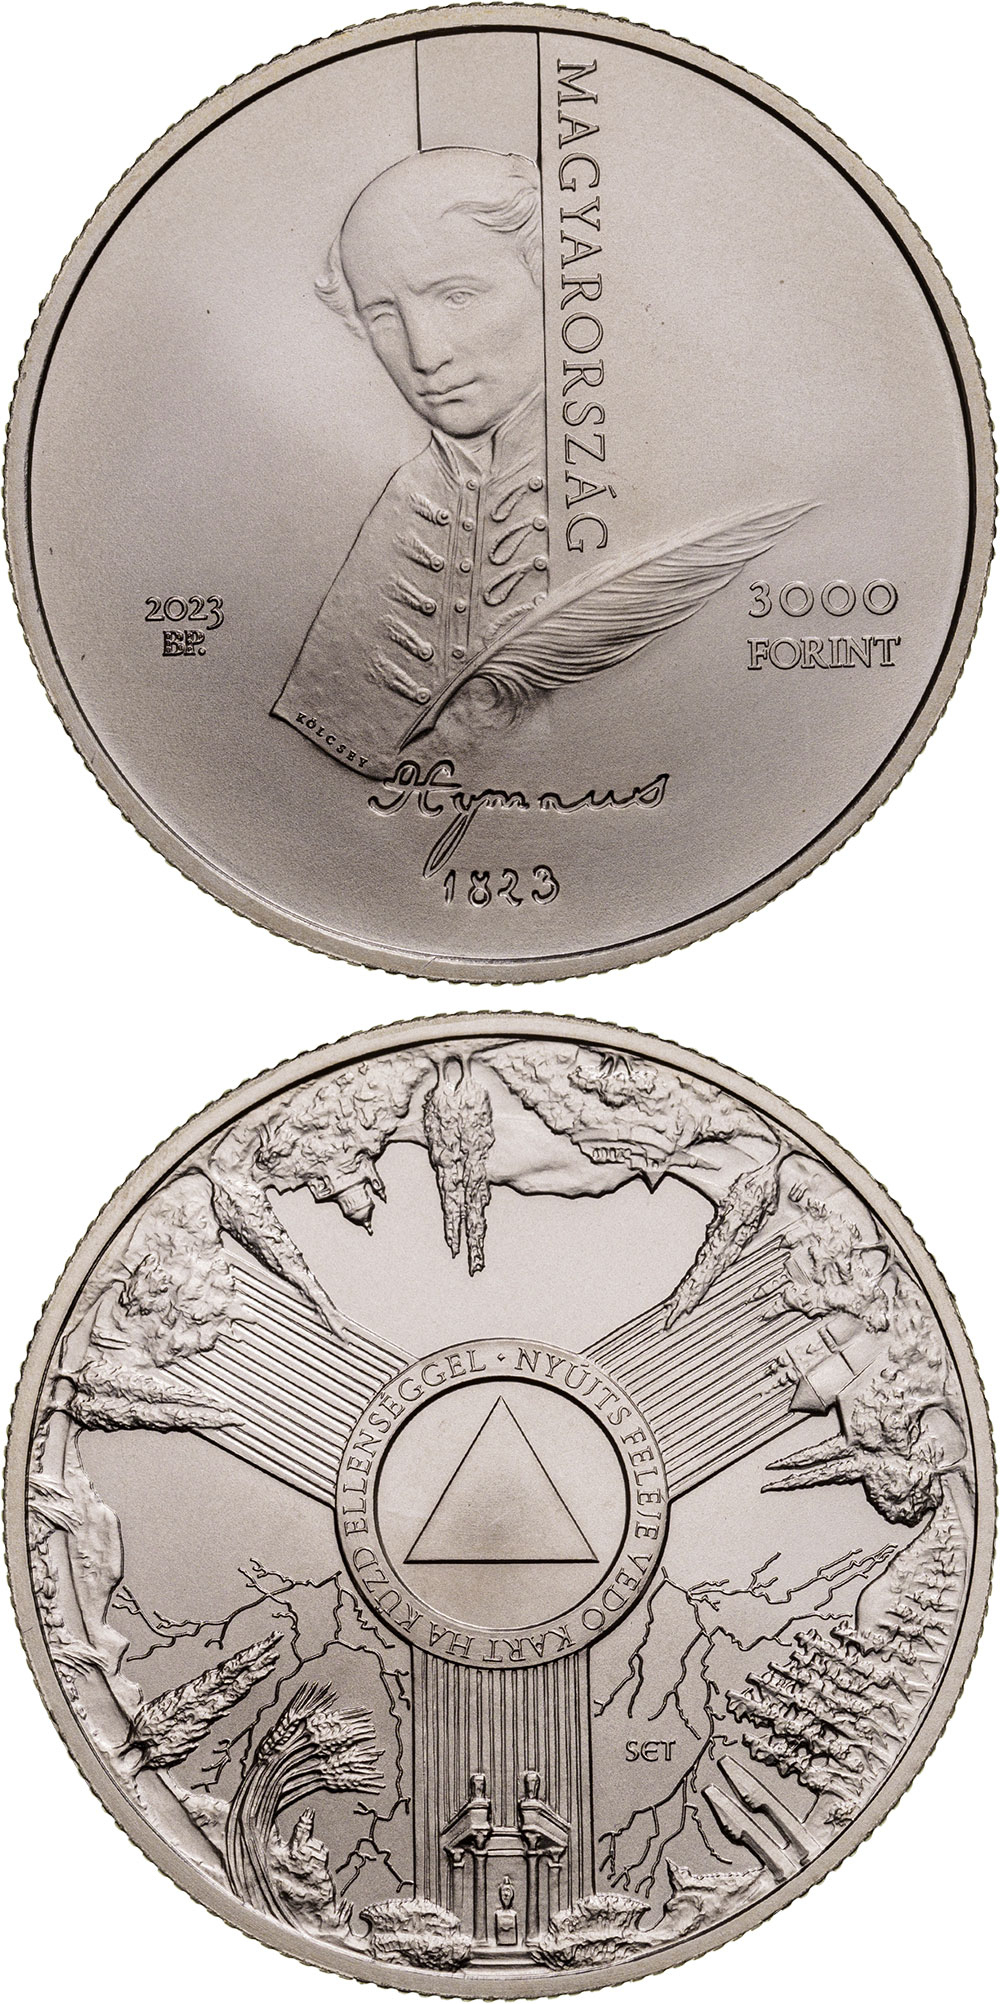 Image of 2000 forint coin - 200th anniversary of the writing of the poem Hymn | Hungary 2023.  The Copper–Nickel (CuNi) coin is of BU quality.